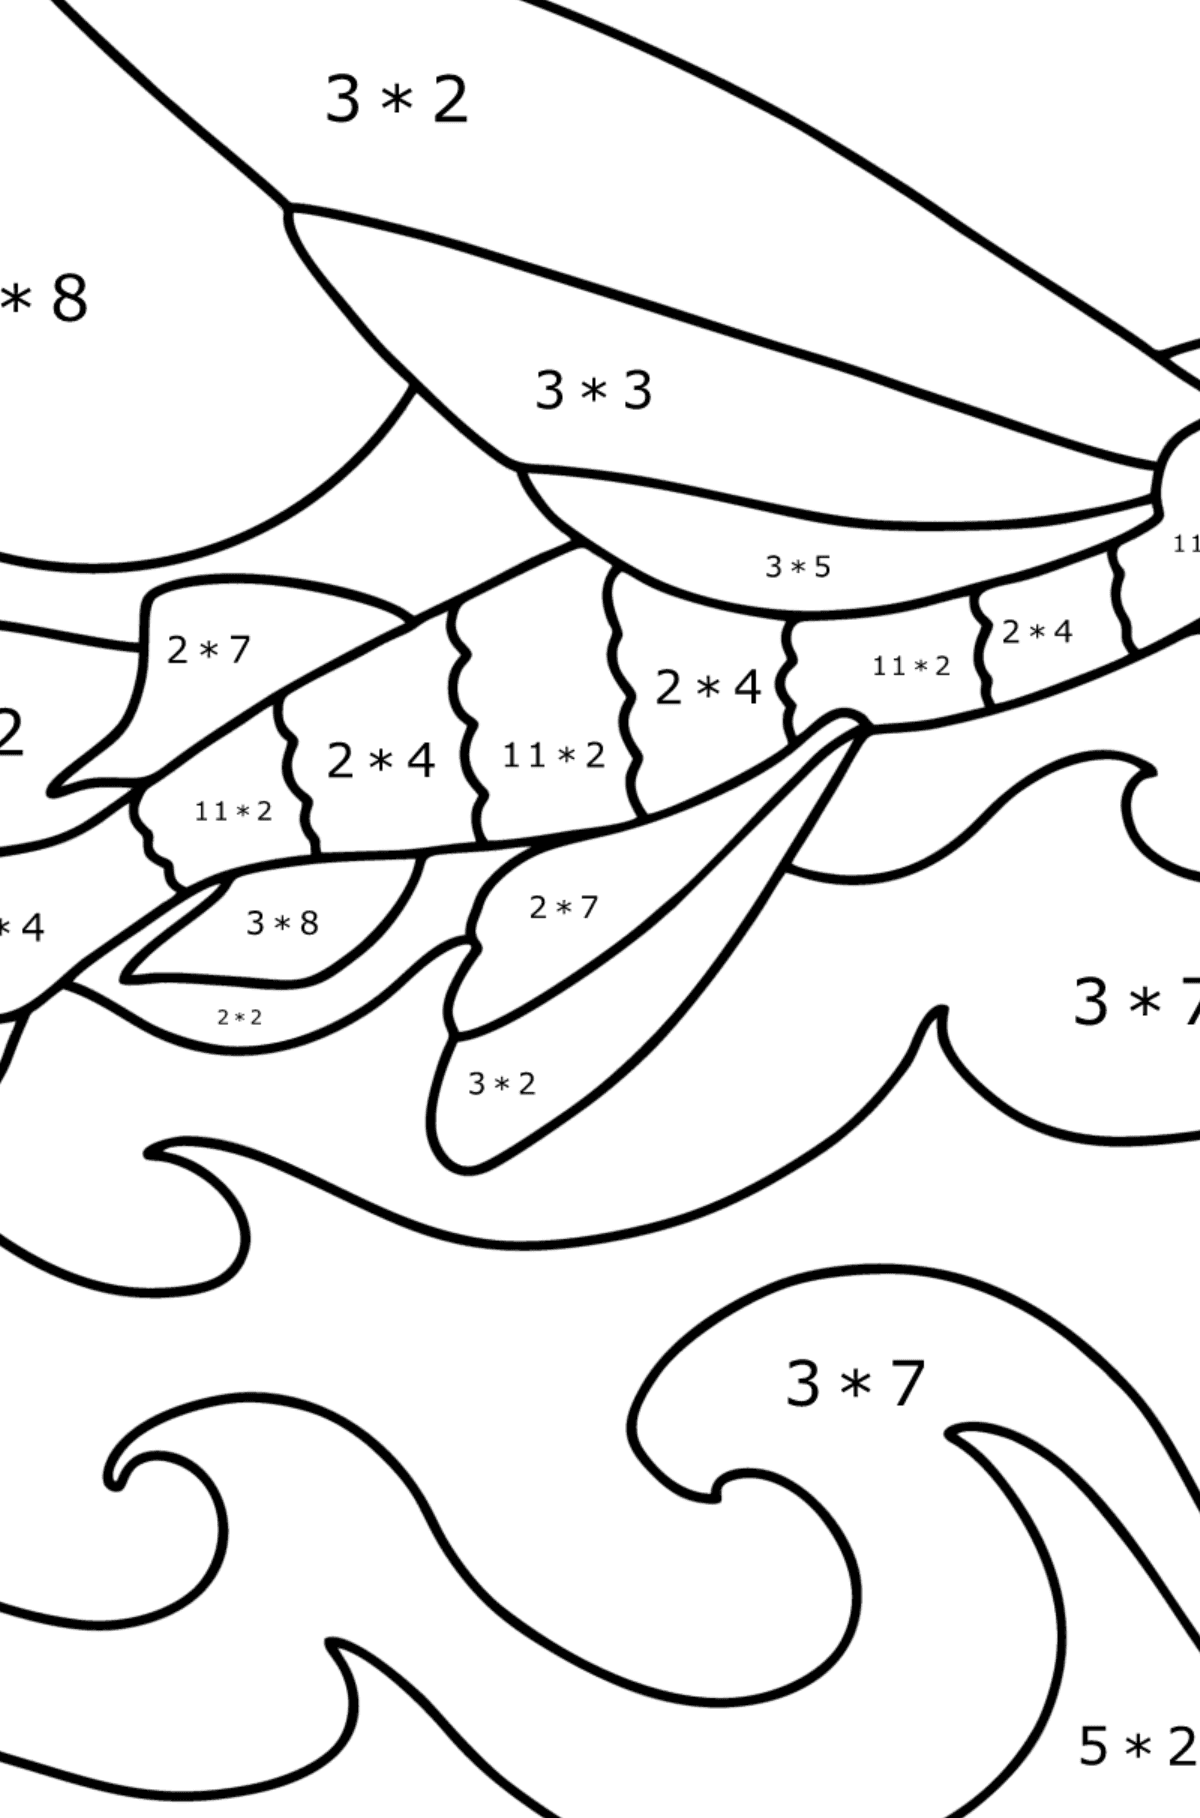 Flying fish coloring page - Math Coloring - Multiplication for Kids